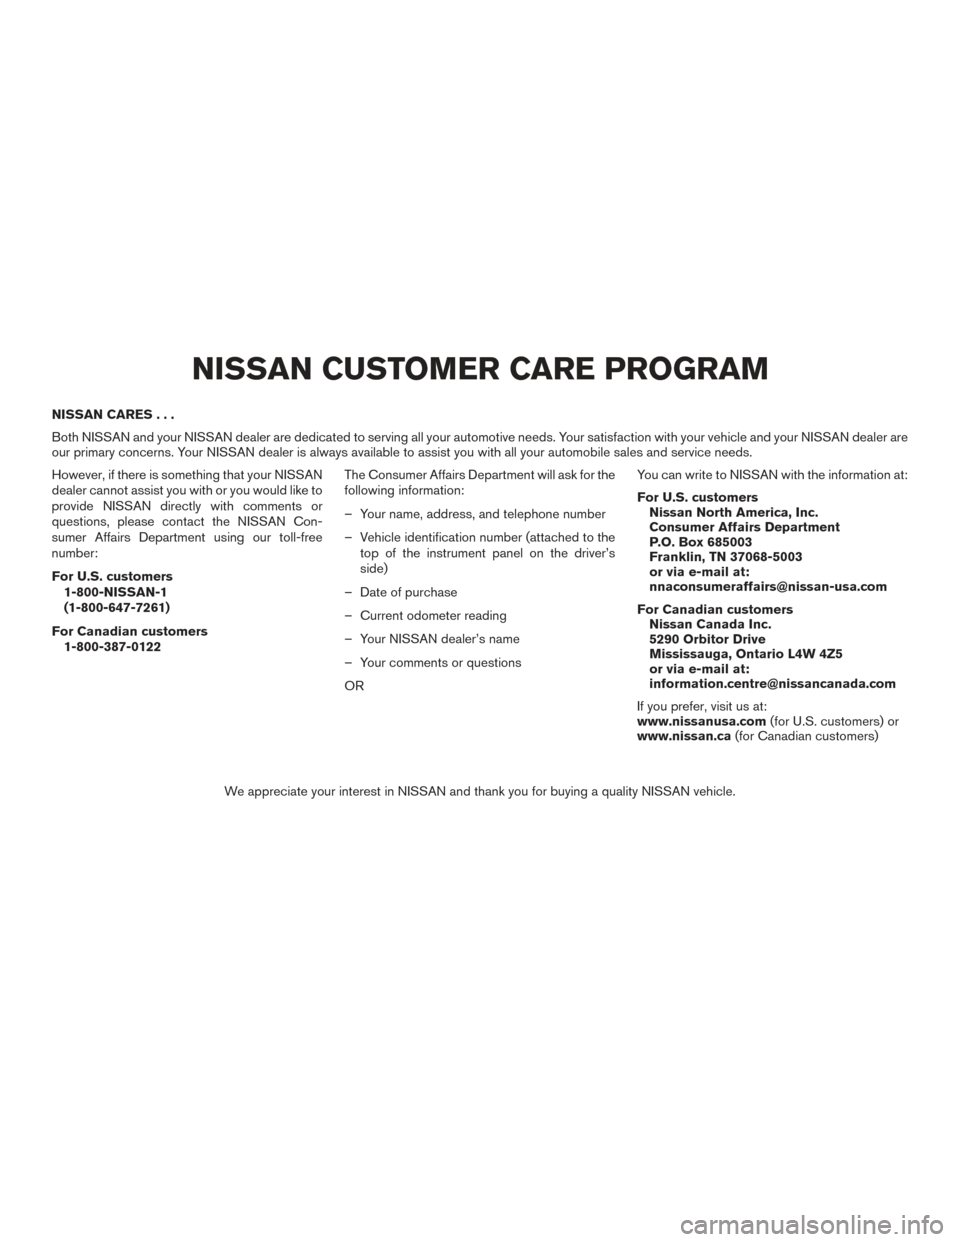 NISSAN PATHFINDER 2017 R52 / 4.G Owners Manual NISSAN CARES...
Both NISSAN and your NISSAN dealer are dedicated to serving all your automotive needs. Your satisfaction with your vehicle and your NISSAN dealer are
our primary concerns. Your NISSAN 